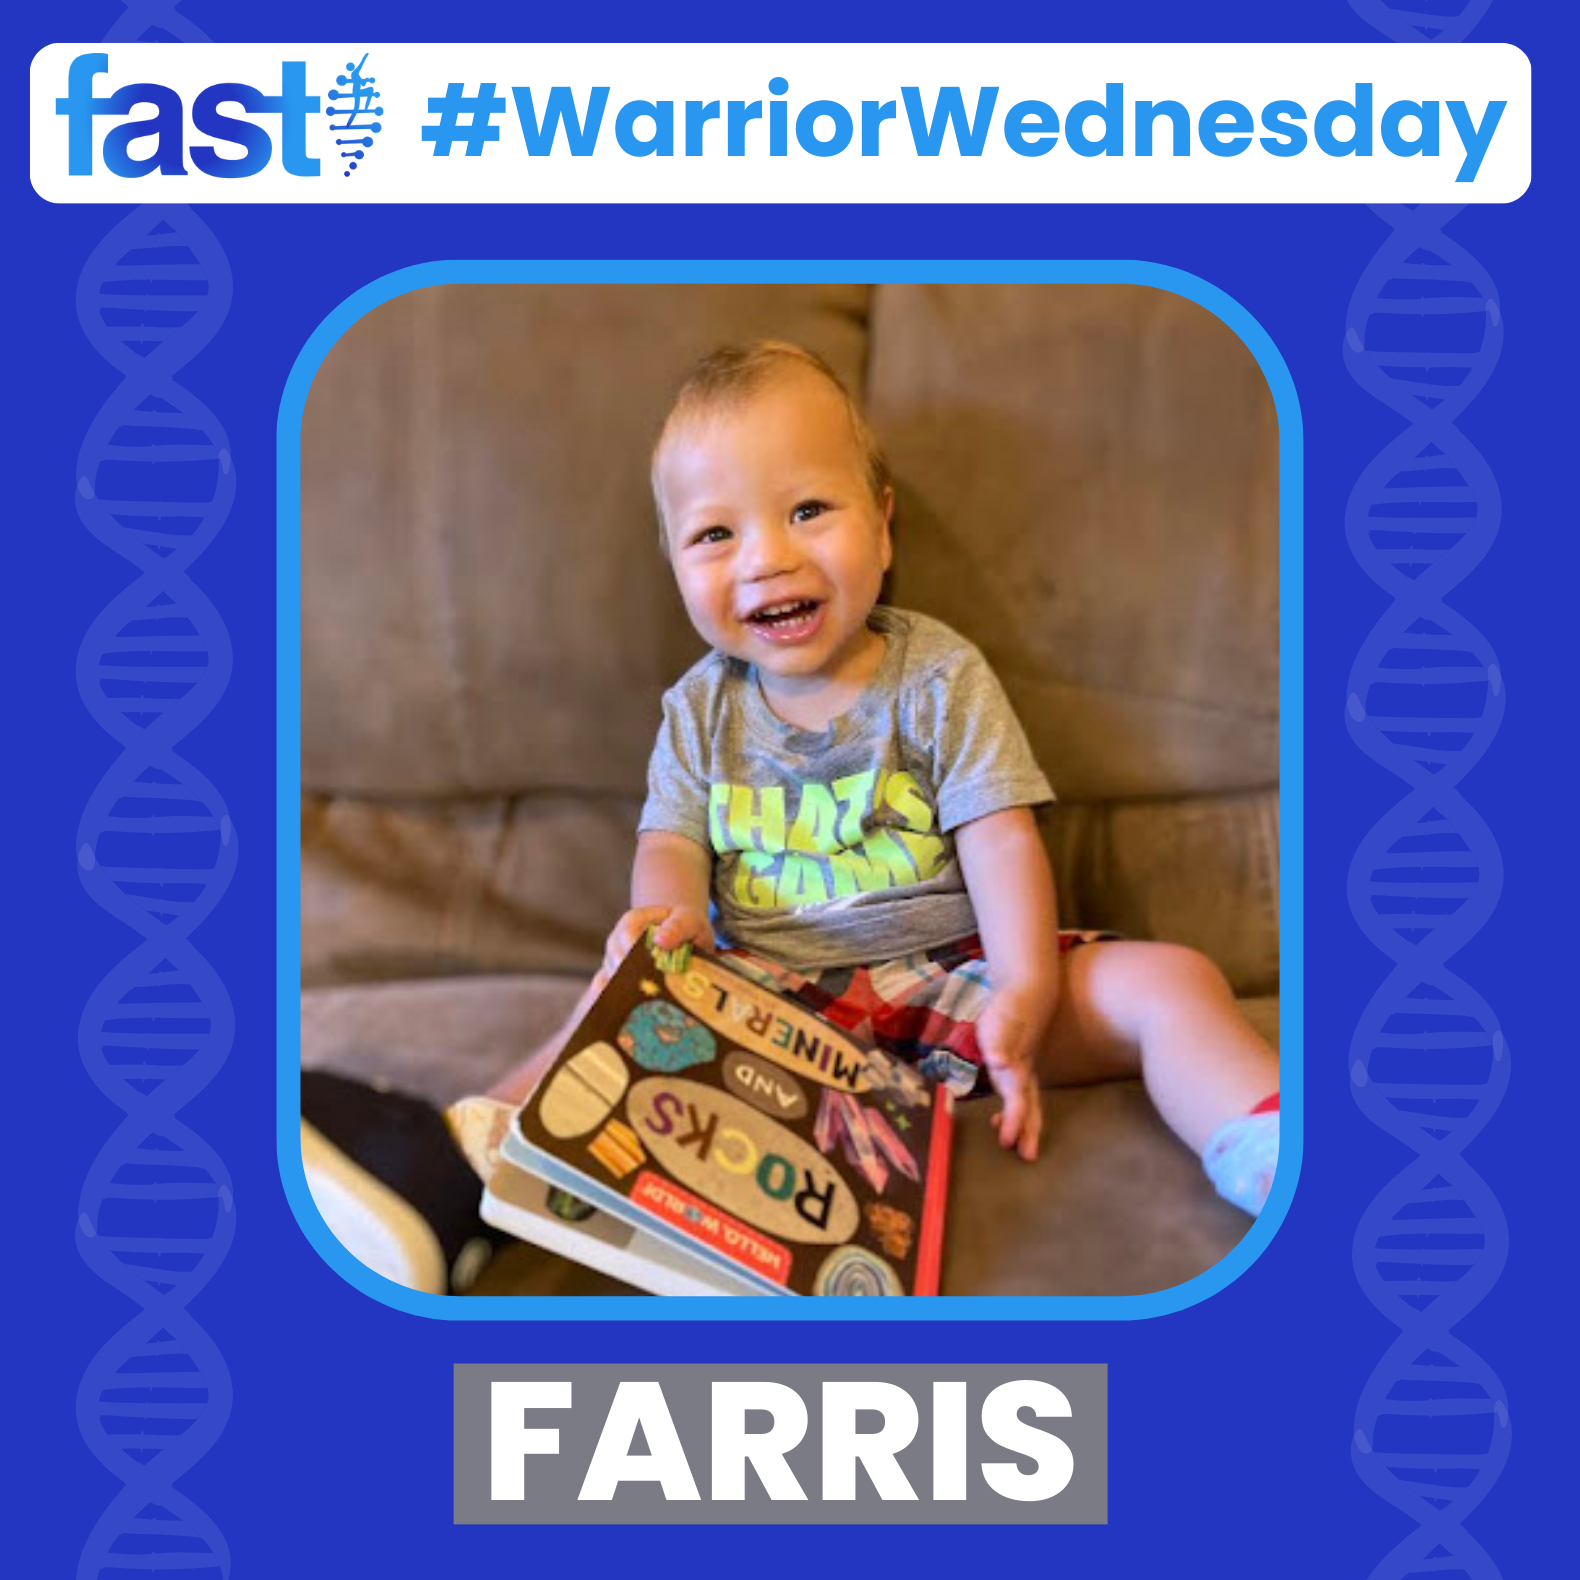 Warrior Wednesday - Farris, with a photo of Farris sitting on a couch with a book